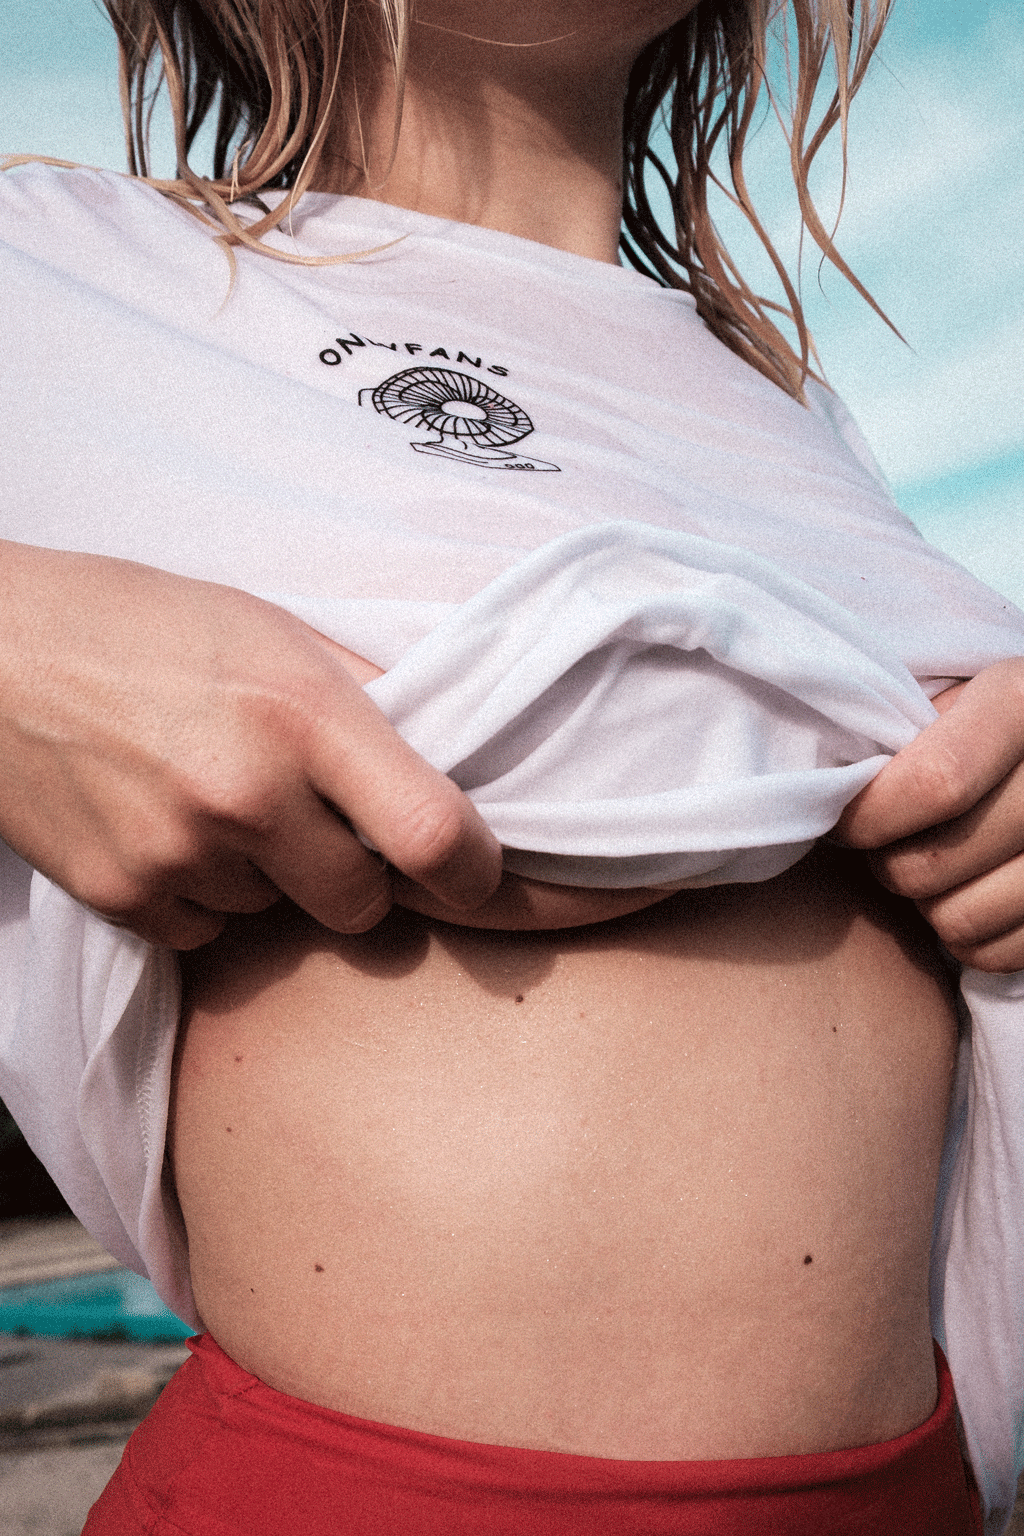 A woman with red bikini shorts, slightly lifting her wet "onlyfans" shirt. Her face is cropped.